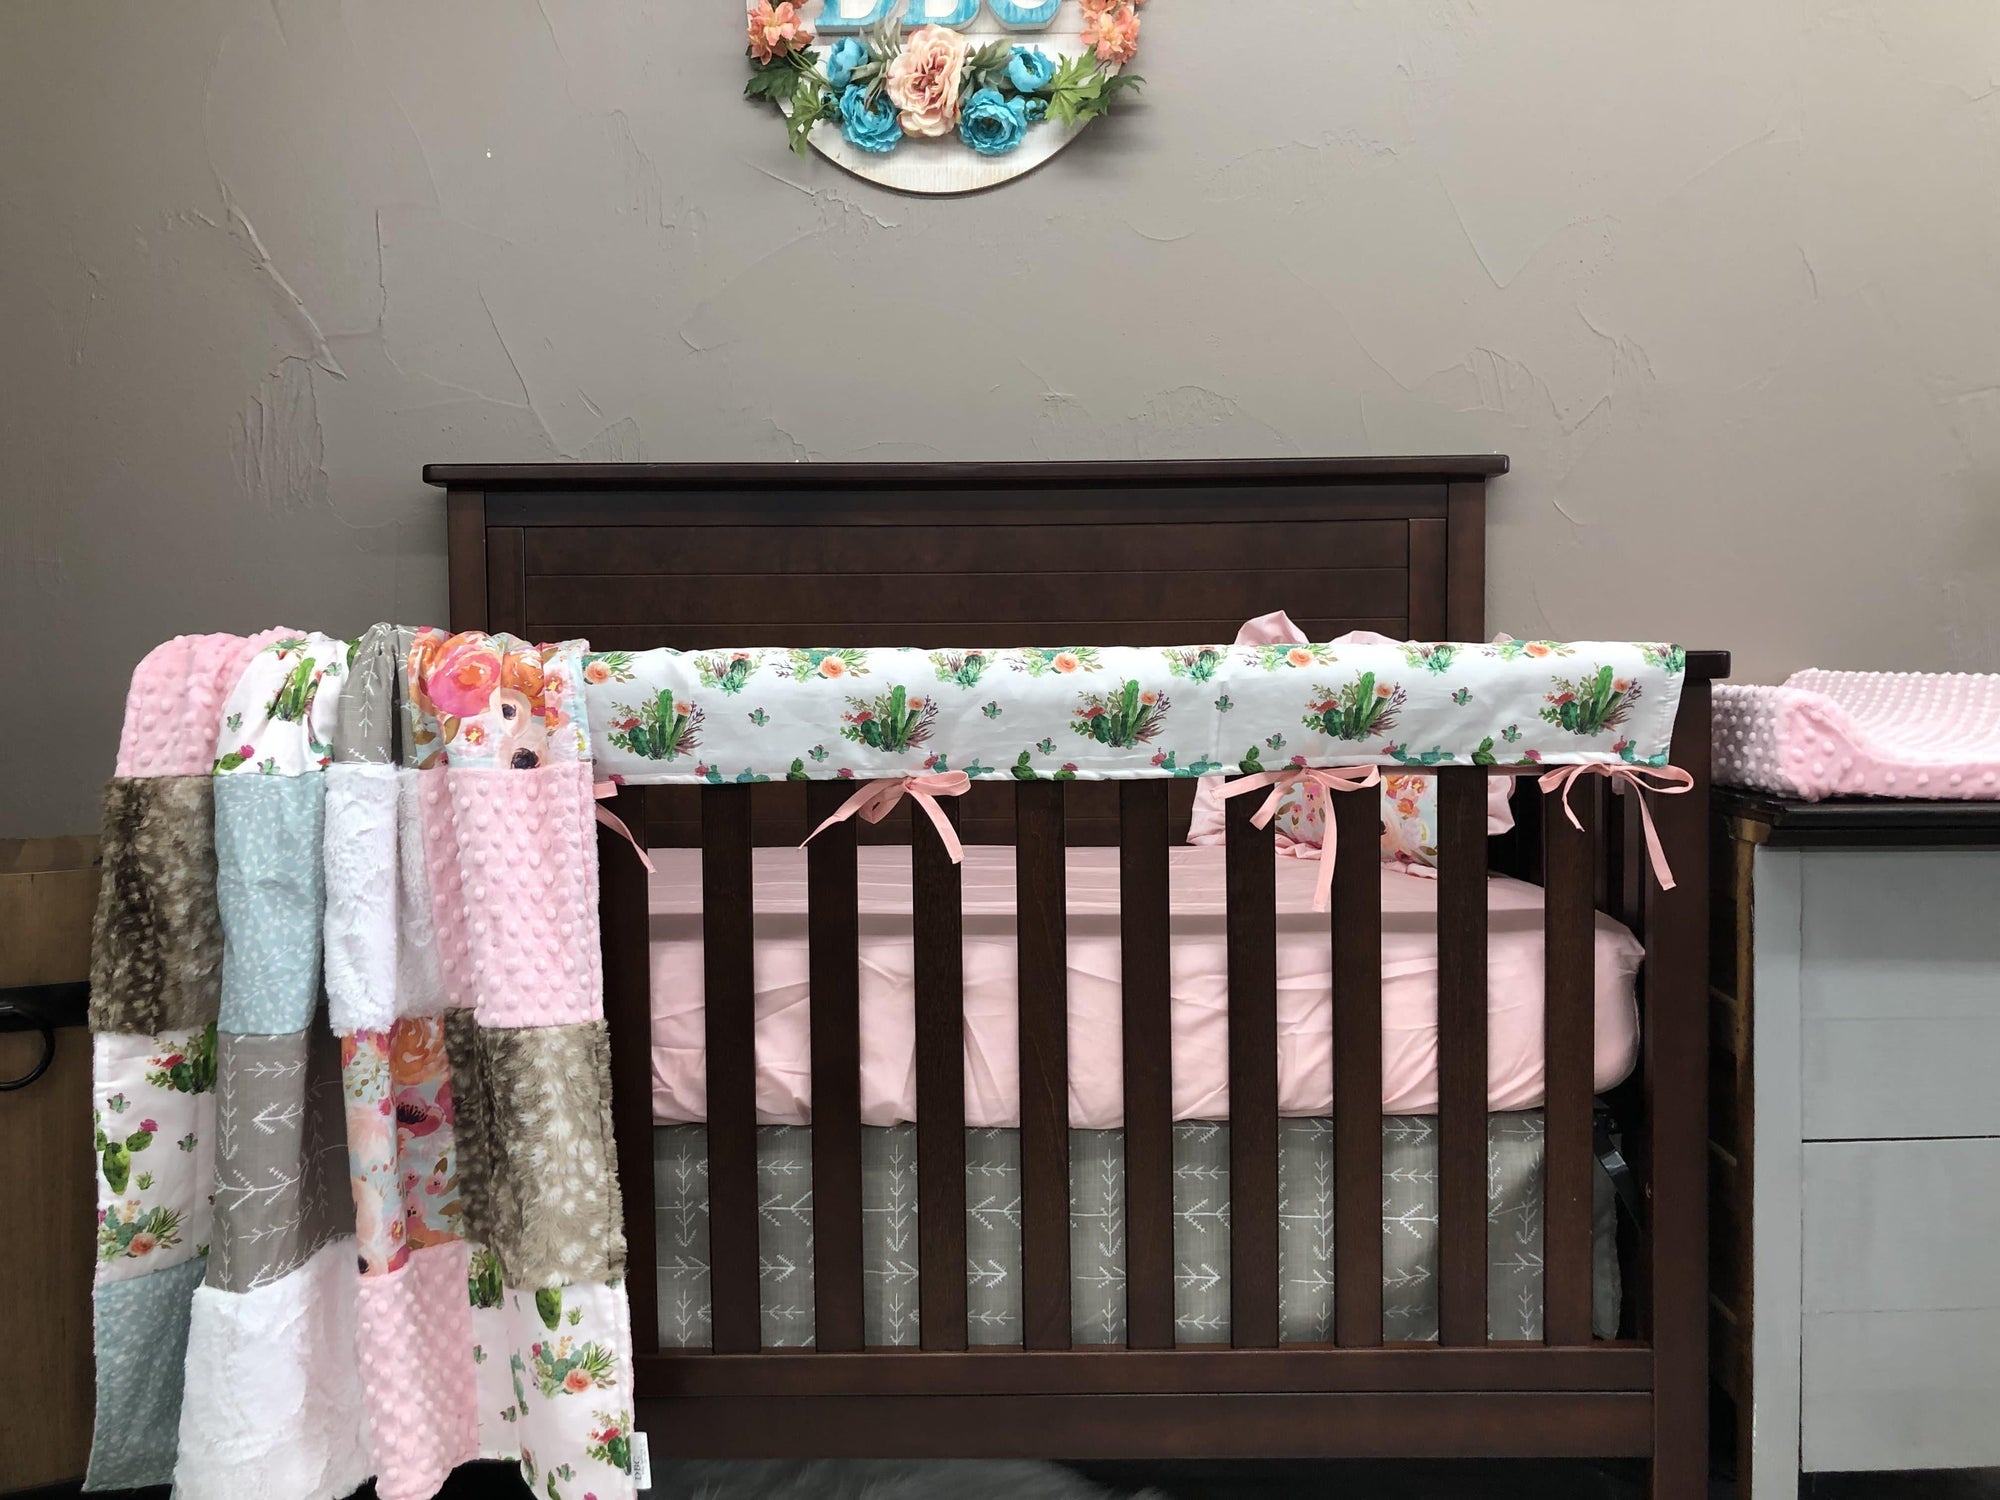 Custom Girl Crib Bedding - Watercolor Floral and Cactus Baby Bedding Collection - DBC Baby Bedding Co 